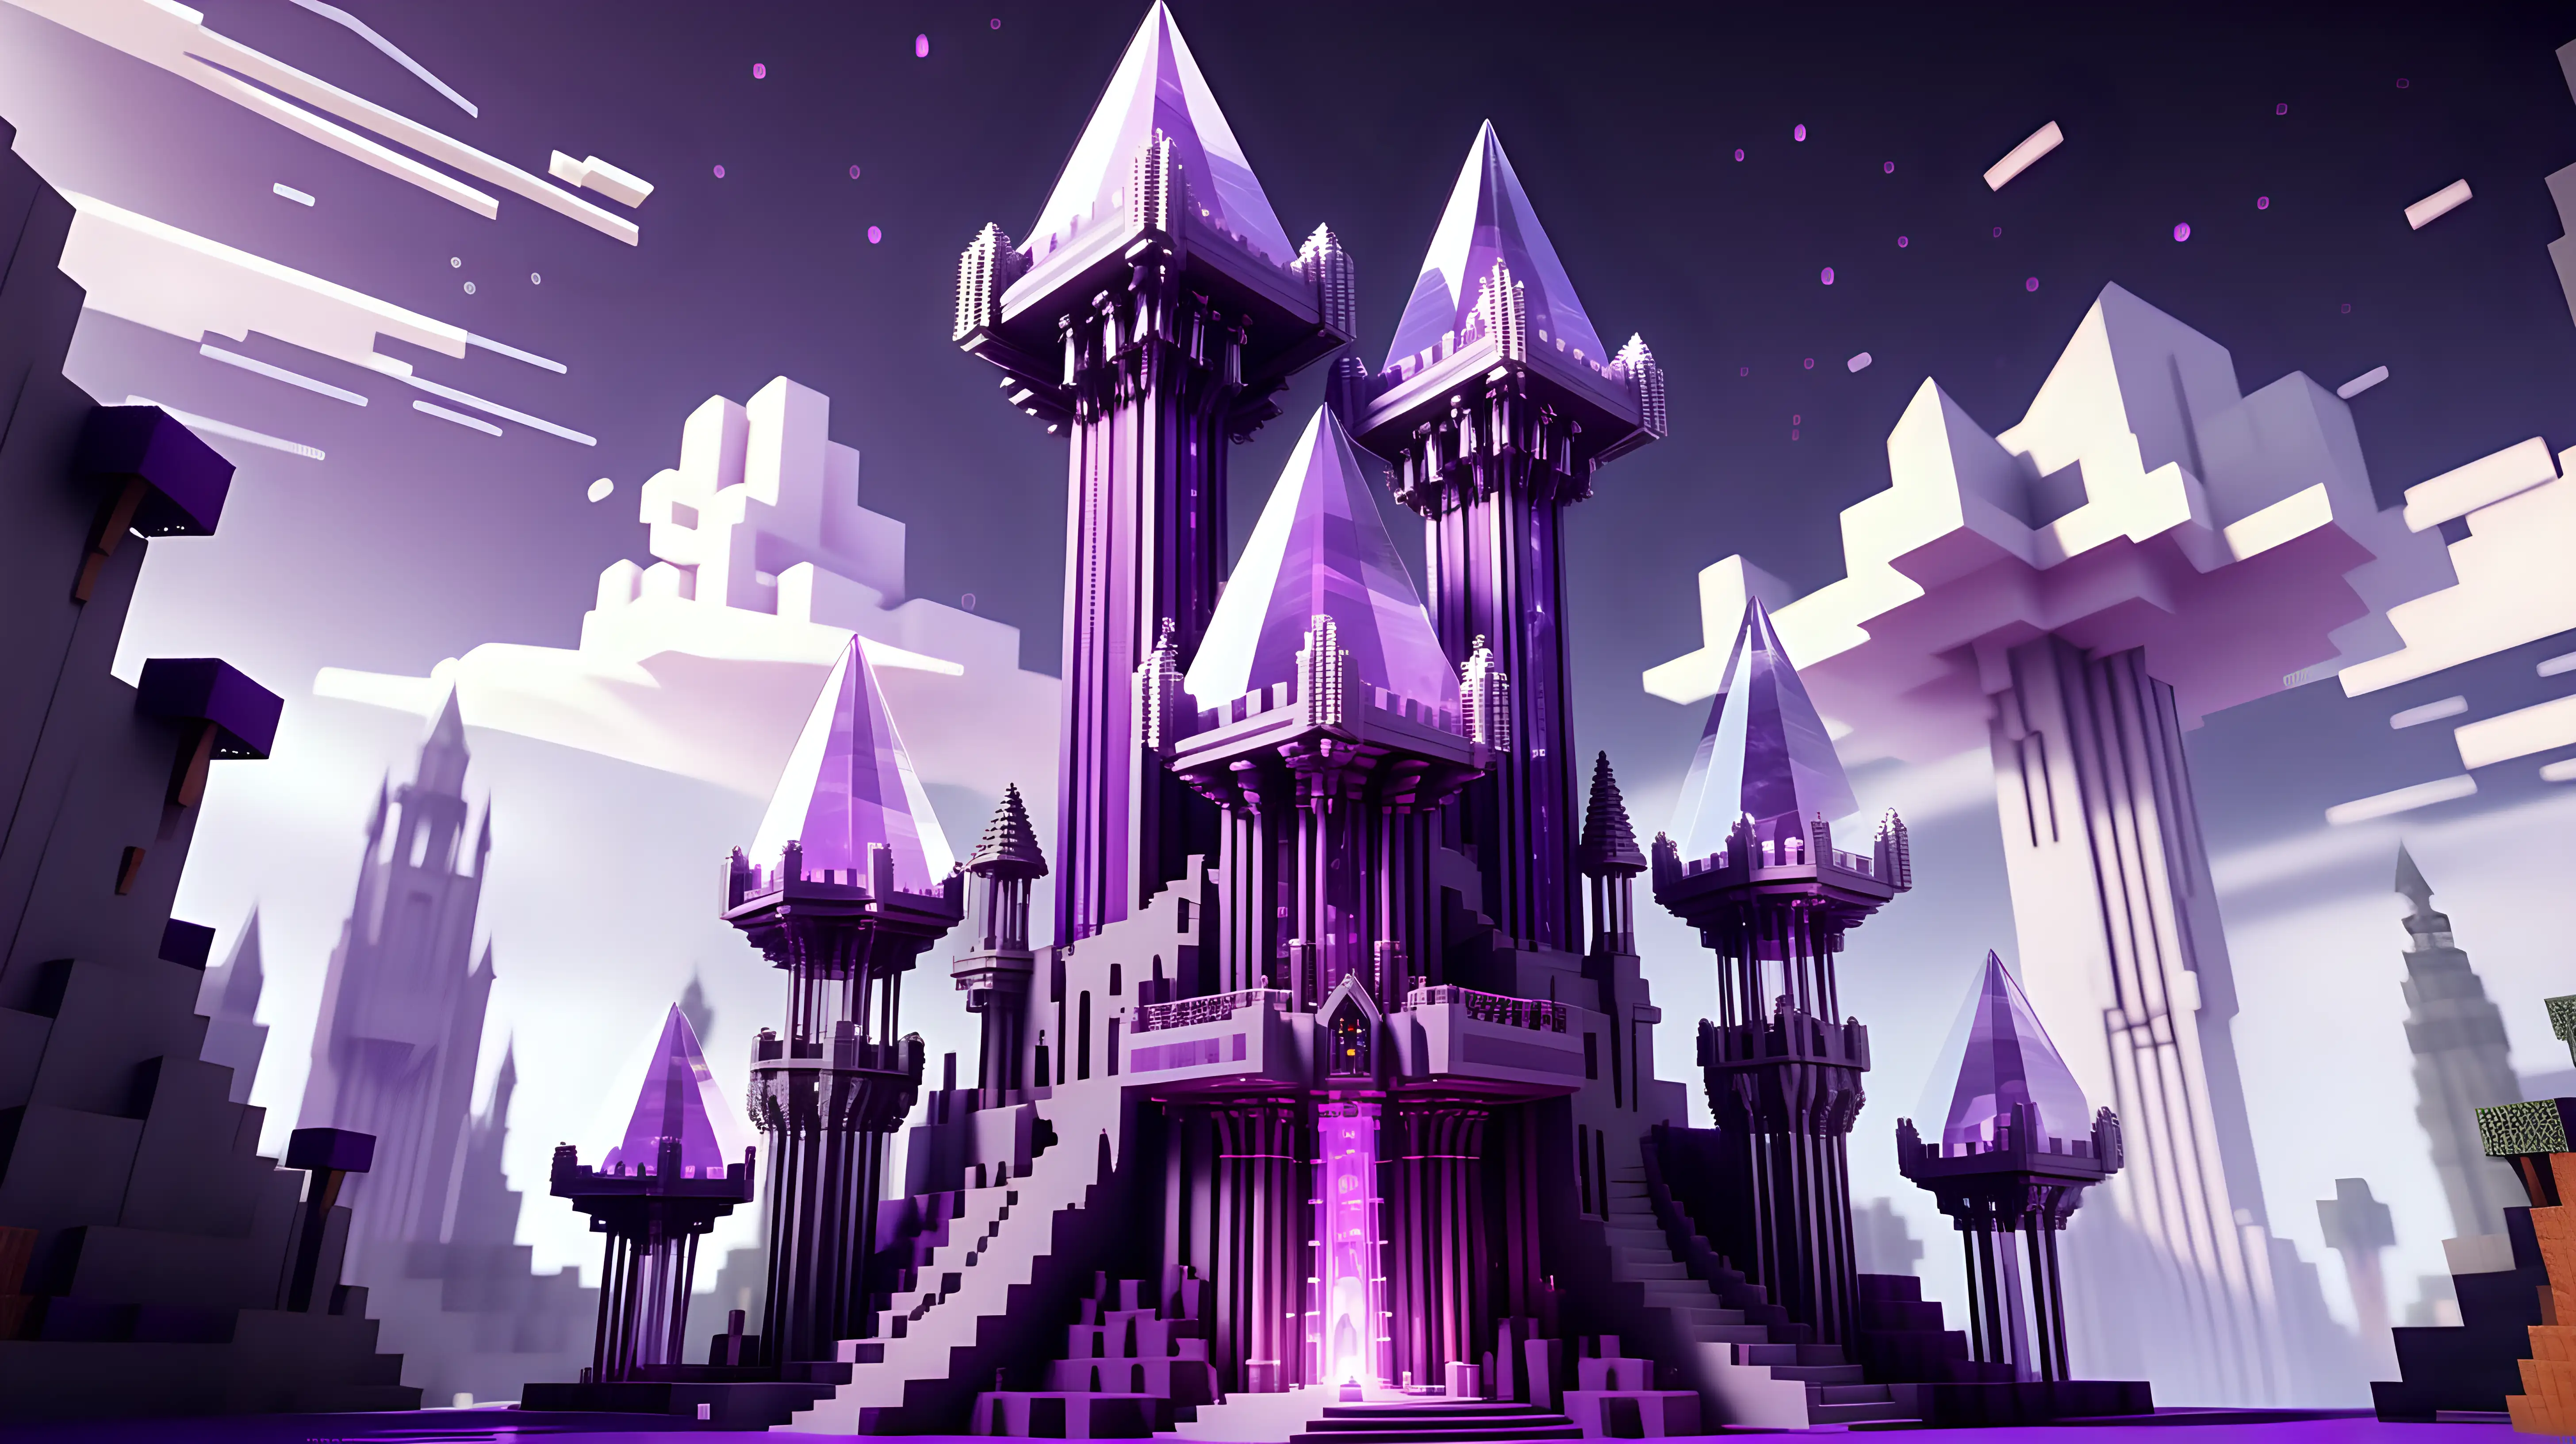 A minecraft style epic wizard tower, it has a beautiful grand design with a central tower made of crystal with a purple spire roof, it has 3 smaller towers hovering in the air around it. It is radiating energy from crystals around it